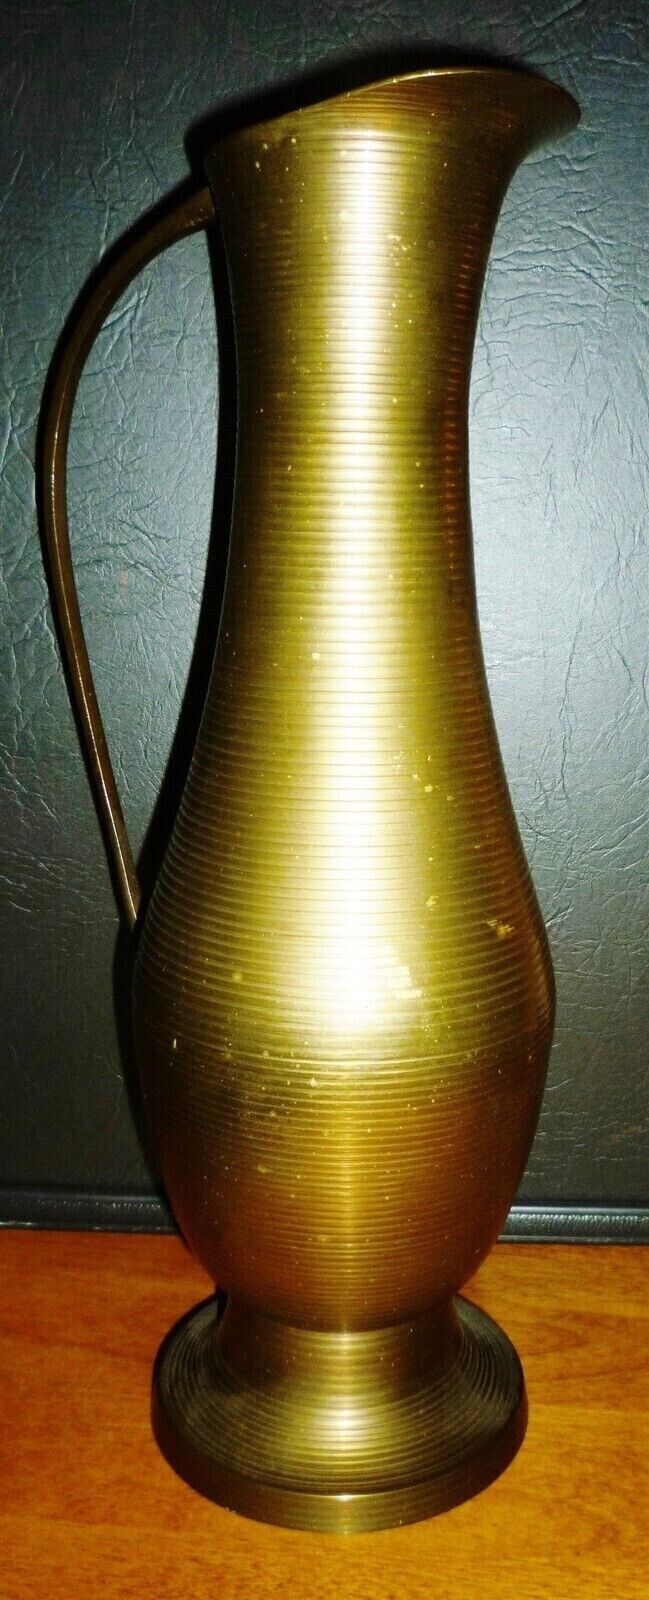 BEAUTIFUL BRASS TALL WATER PITCHER VASE BY SARNABRASS INDIA